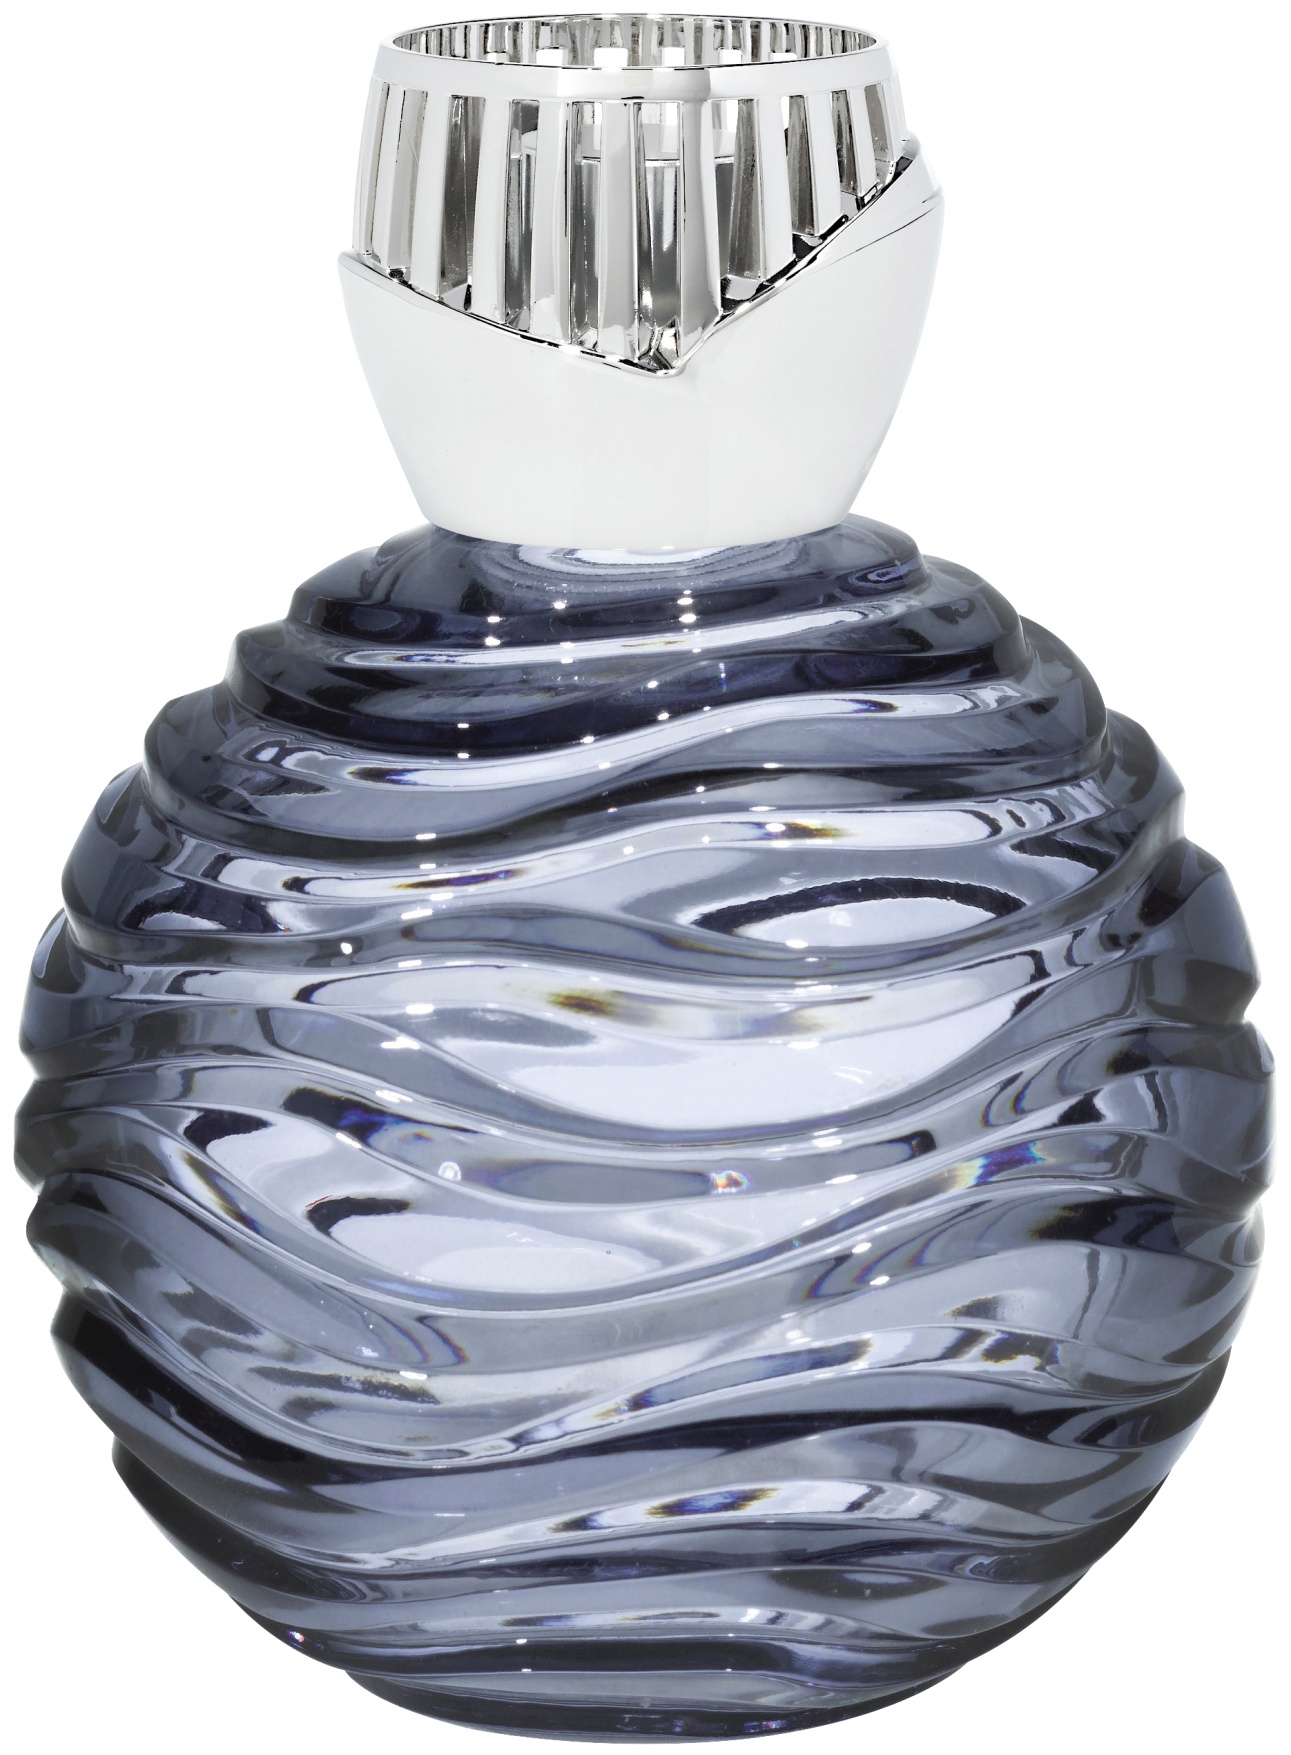 Lampa catalitica Berger Les Editions d’art Crystal Globe Smocked Maison Berger pret redus